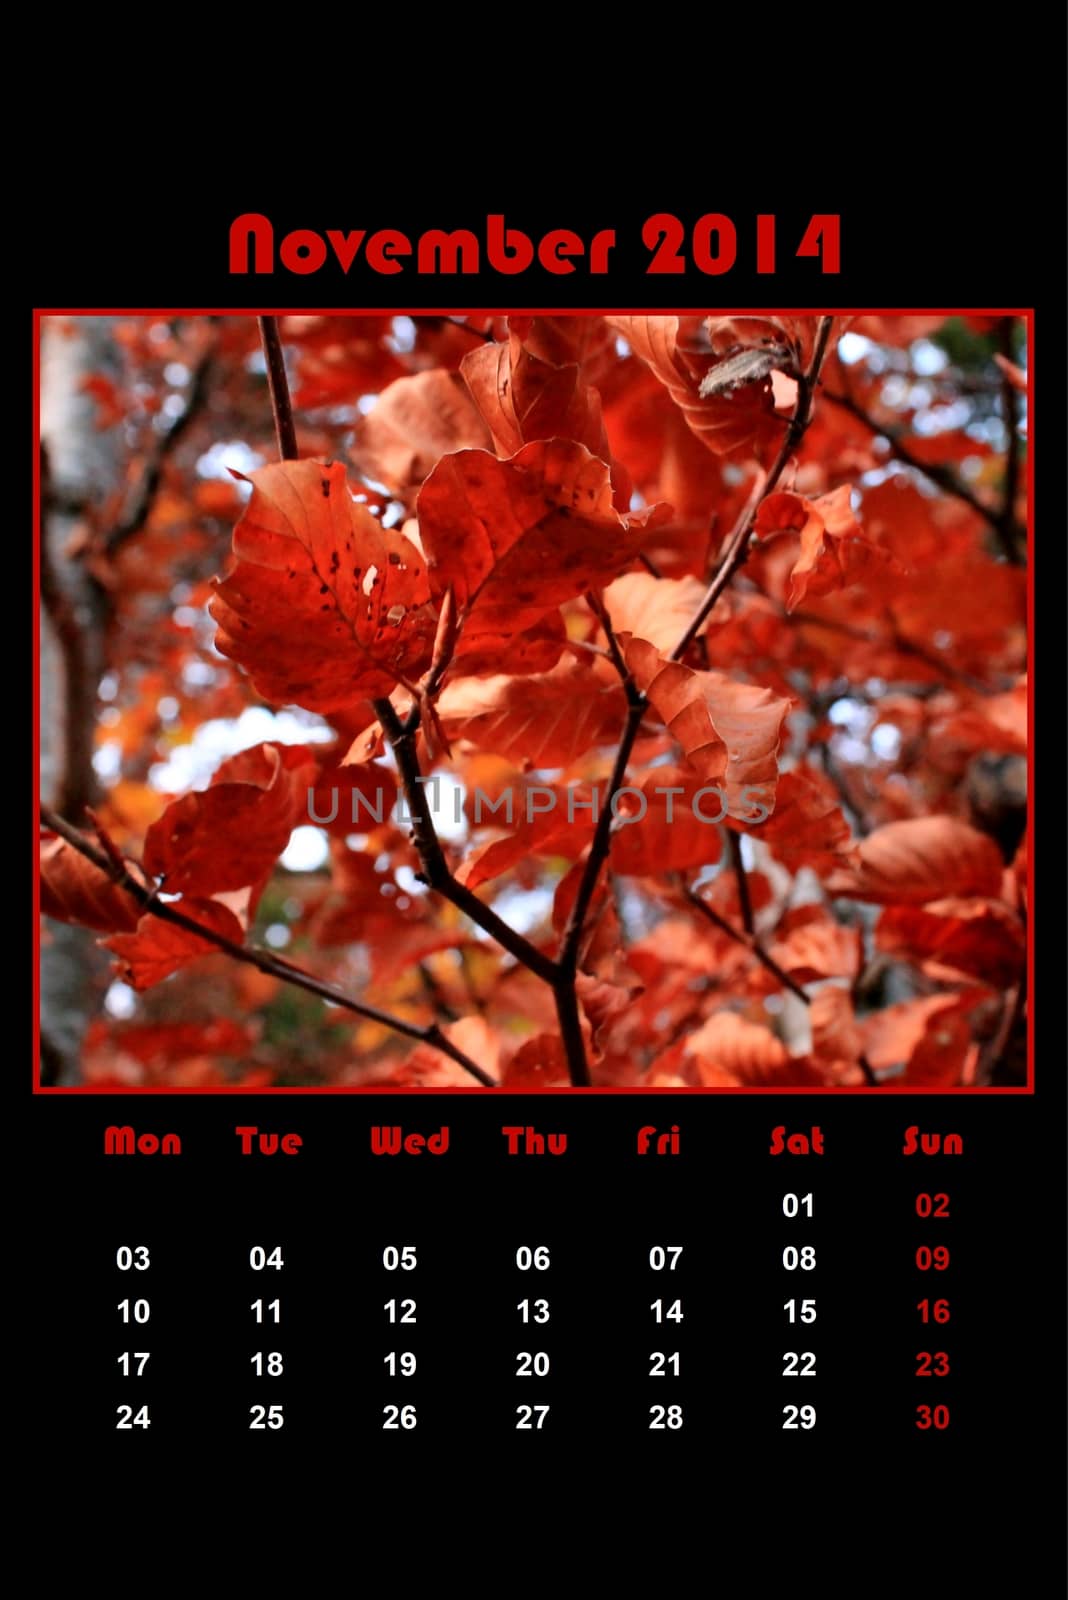 Colorful english calendar for november 2014 in black background, red leaves